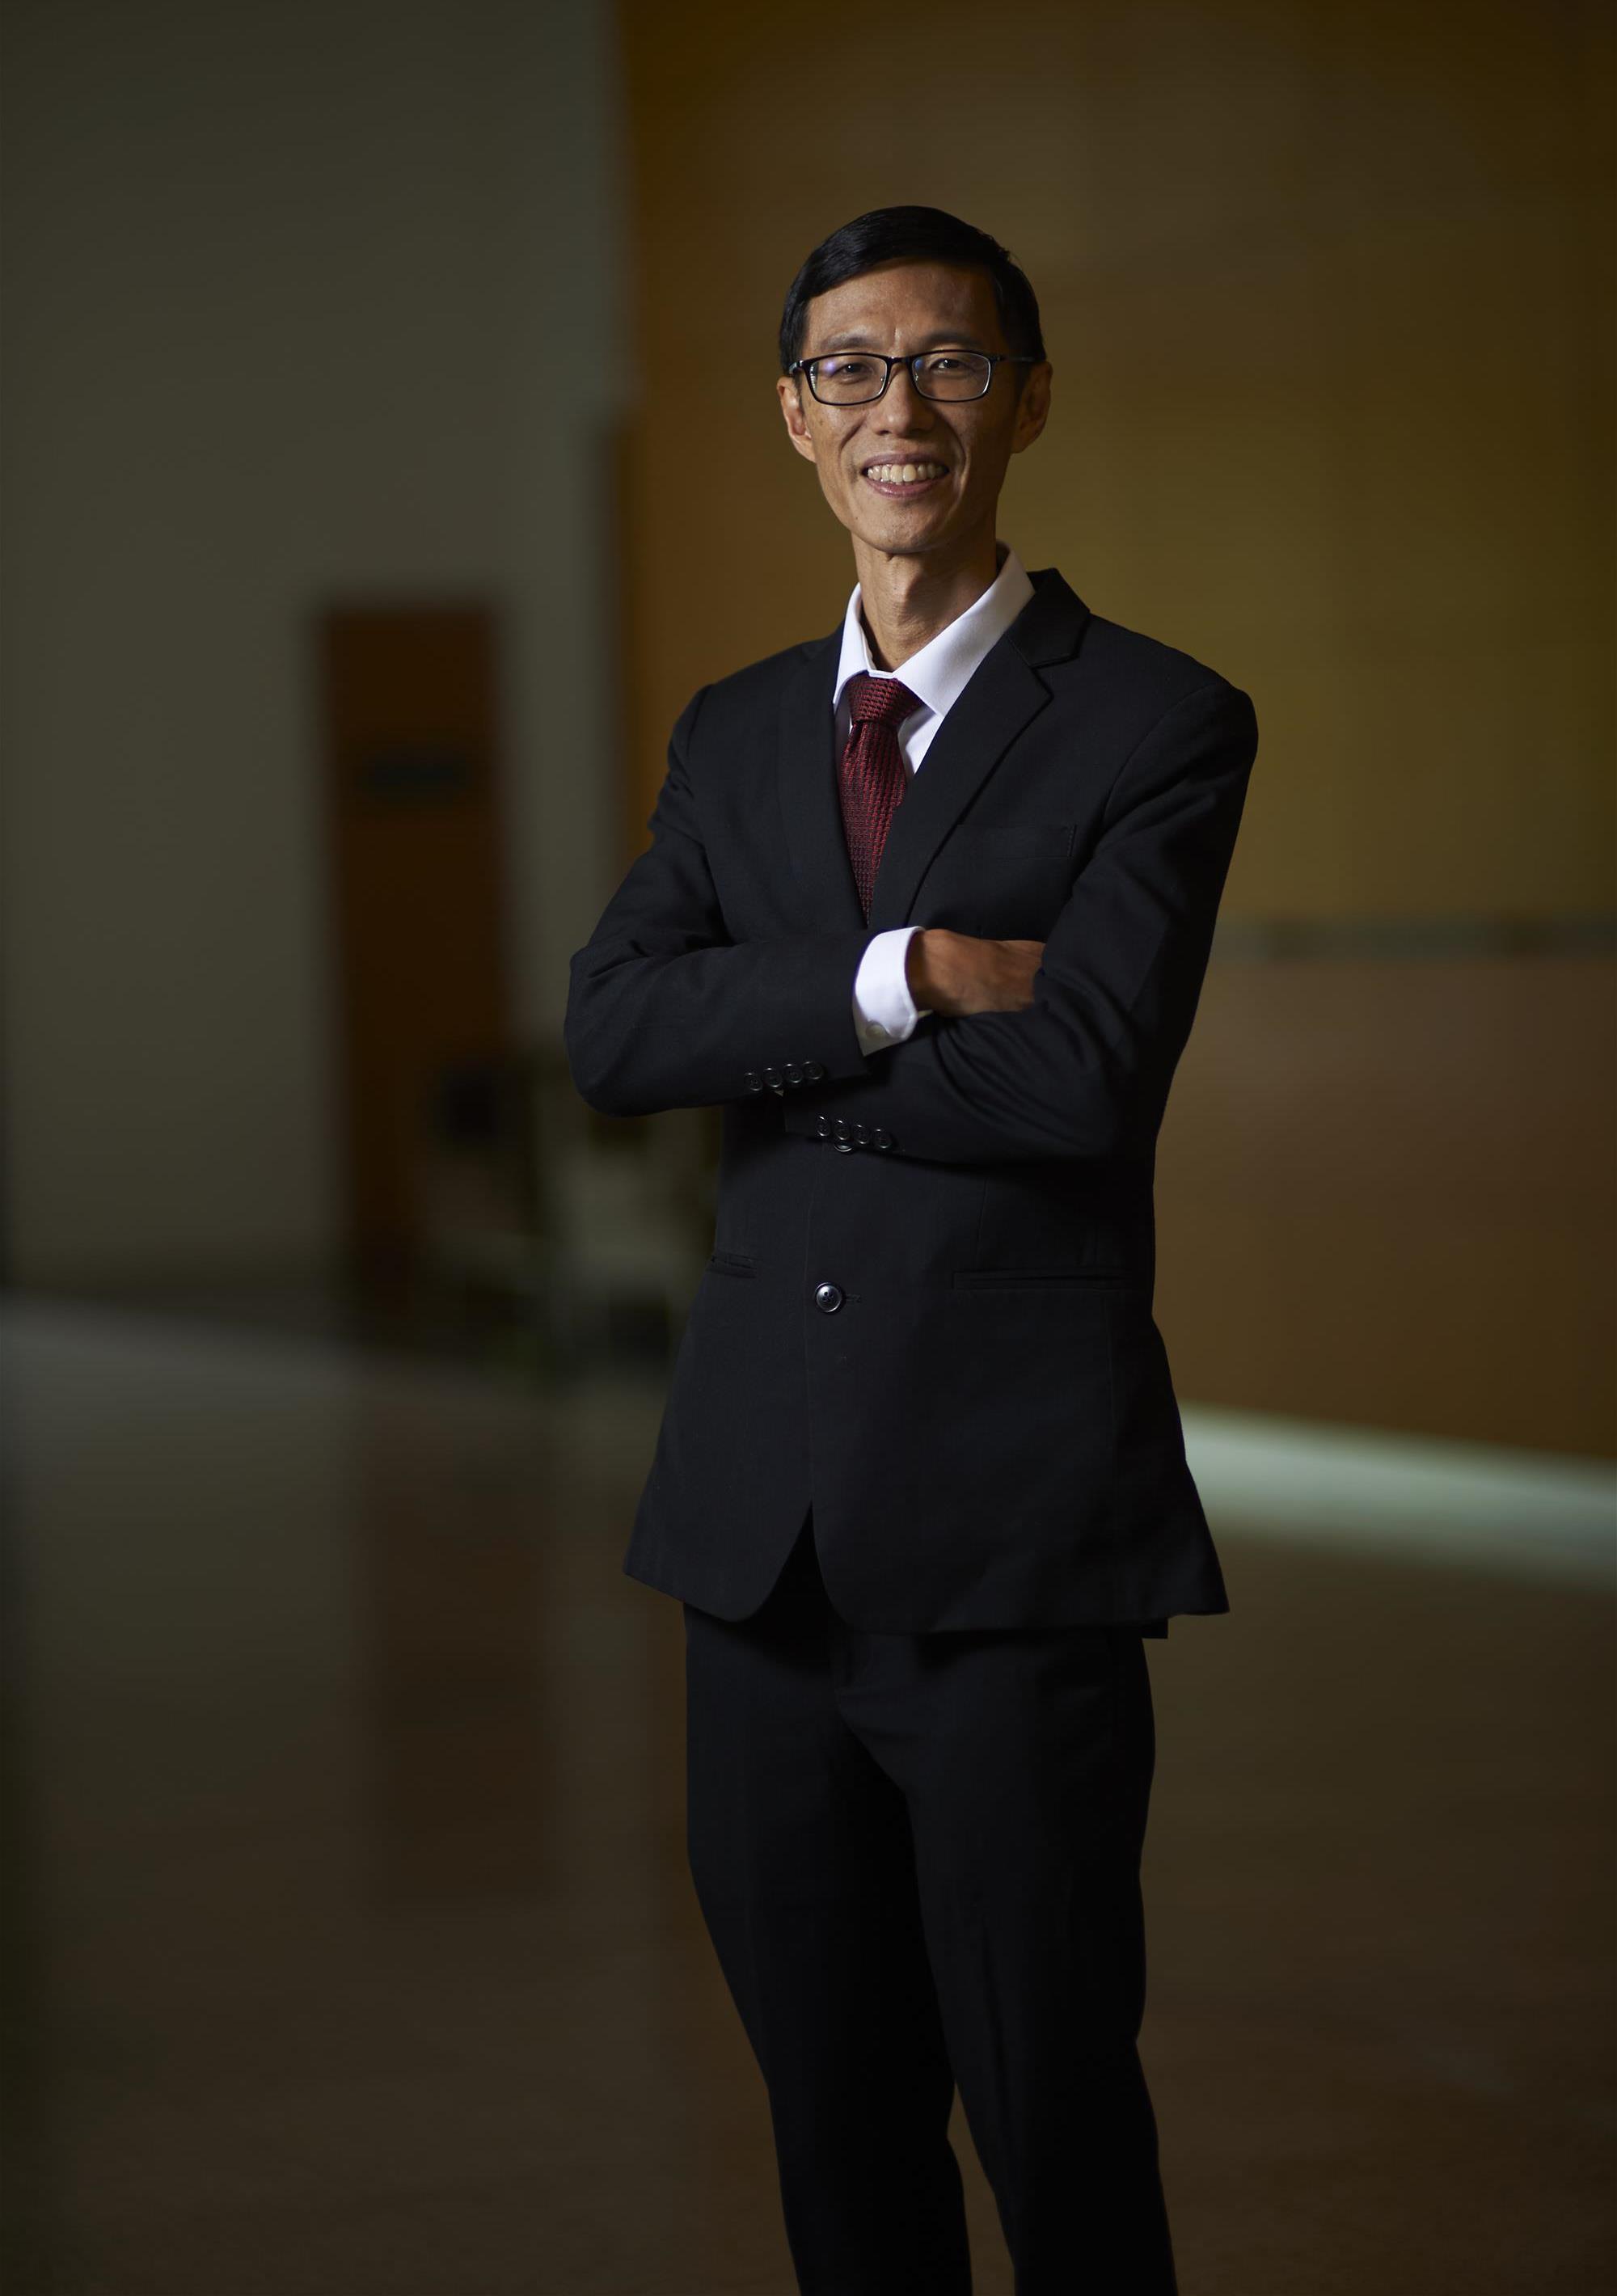 Prof Marcus Ong